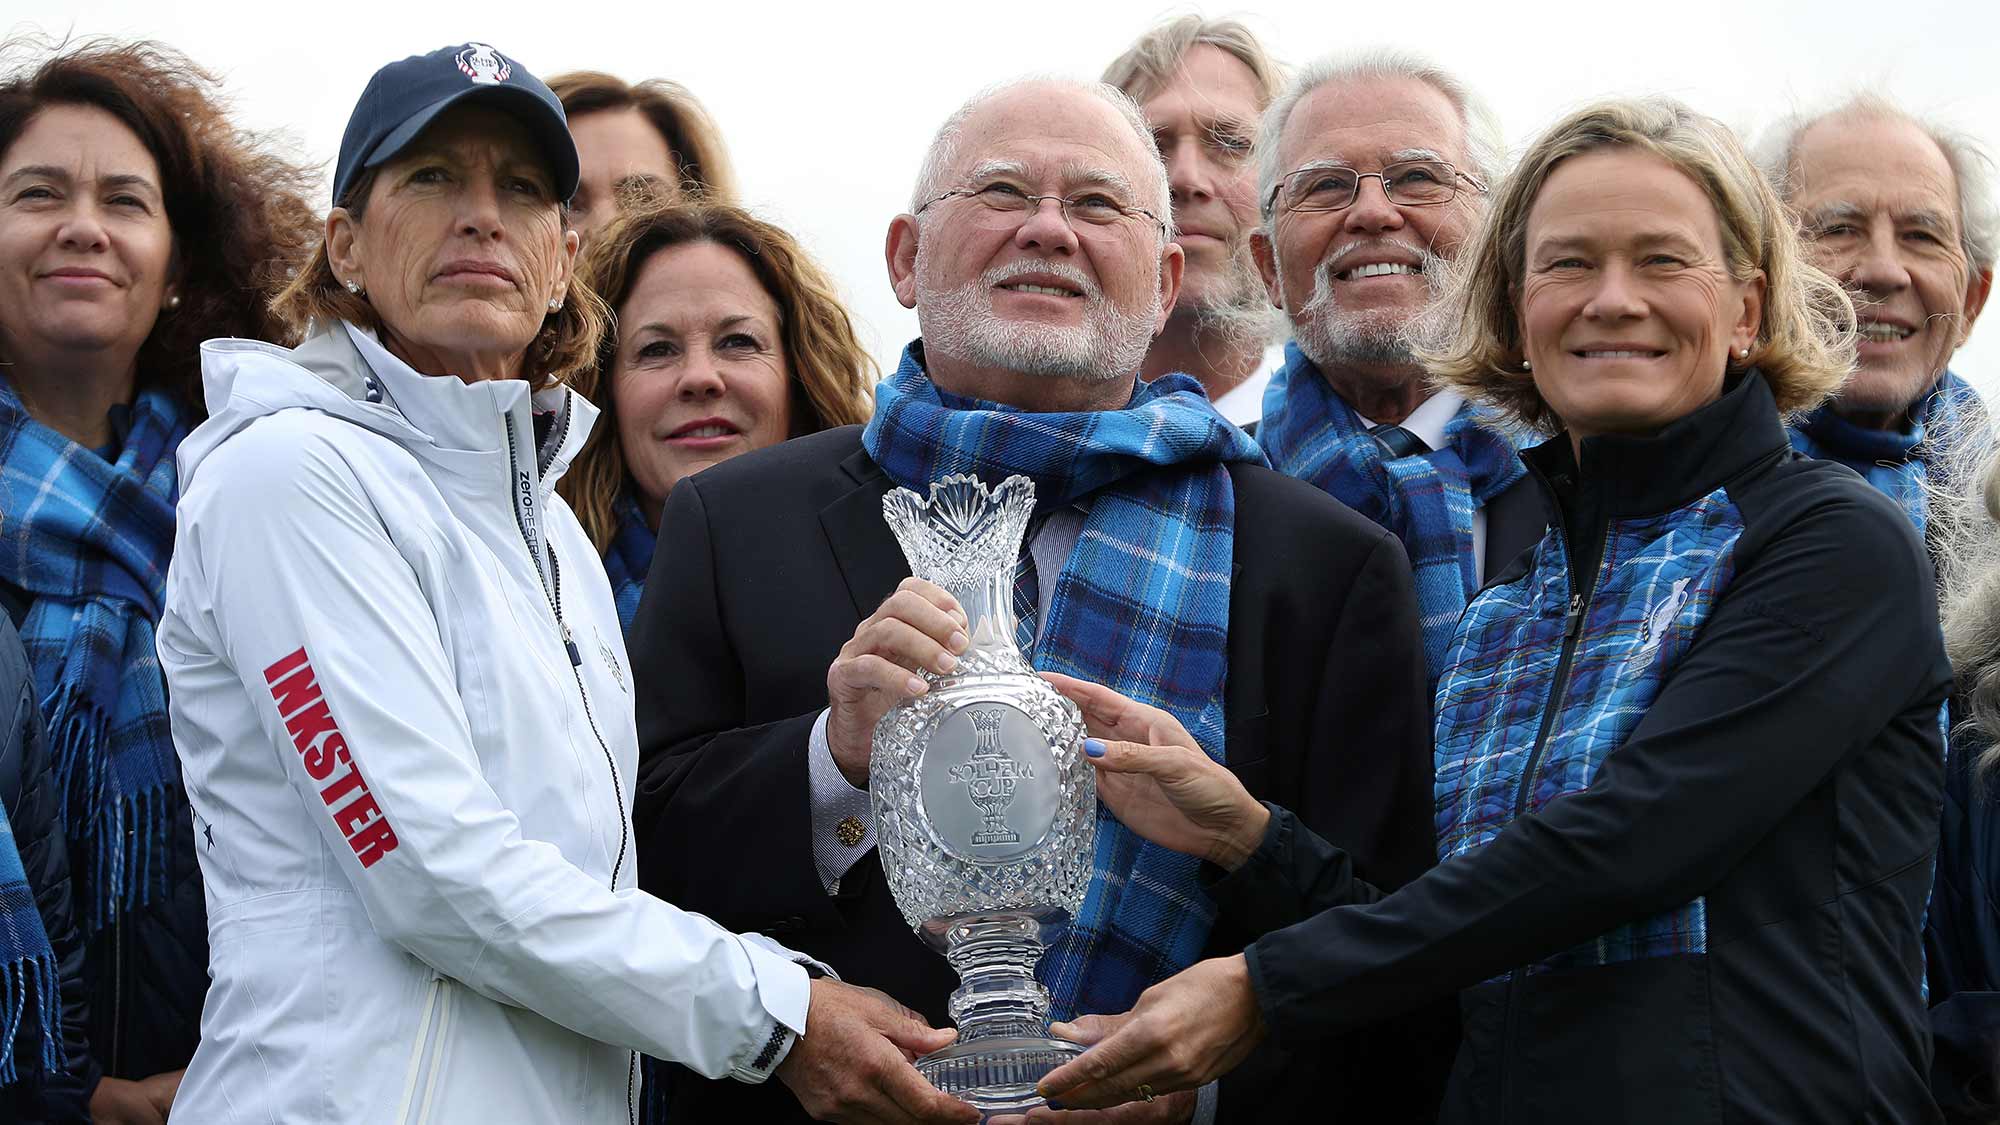 Solheim Cup to Move to Even Years Starting in 2024 Solheim Cup